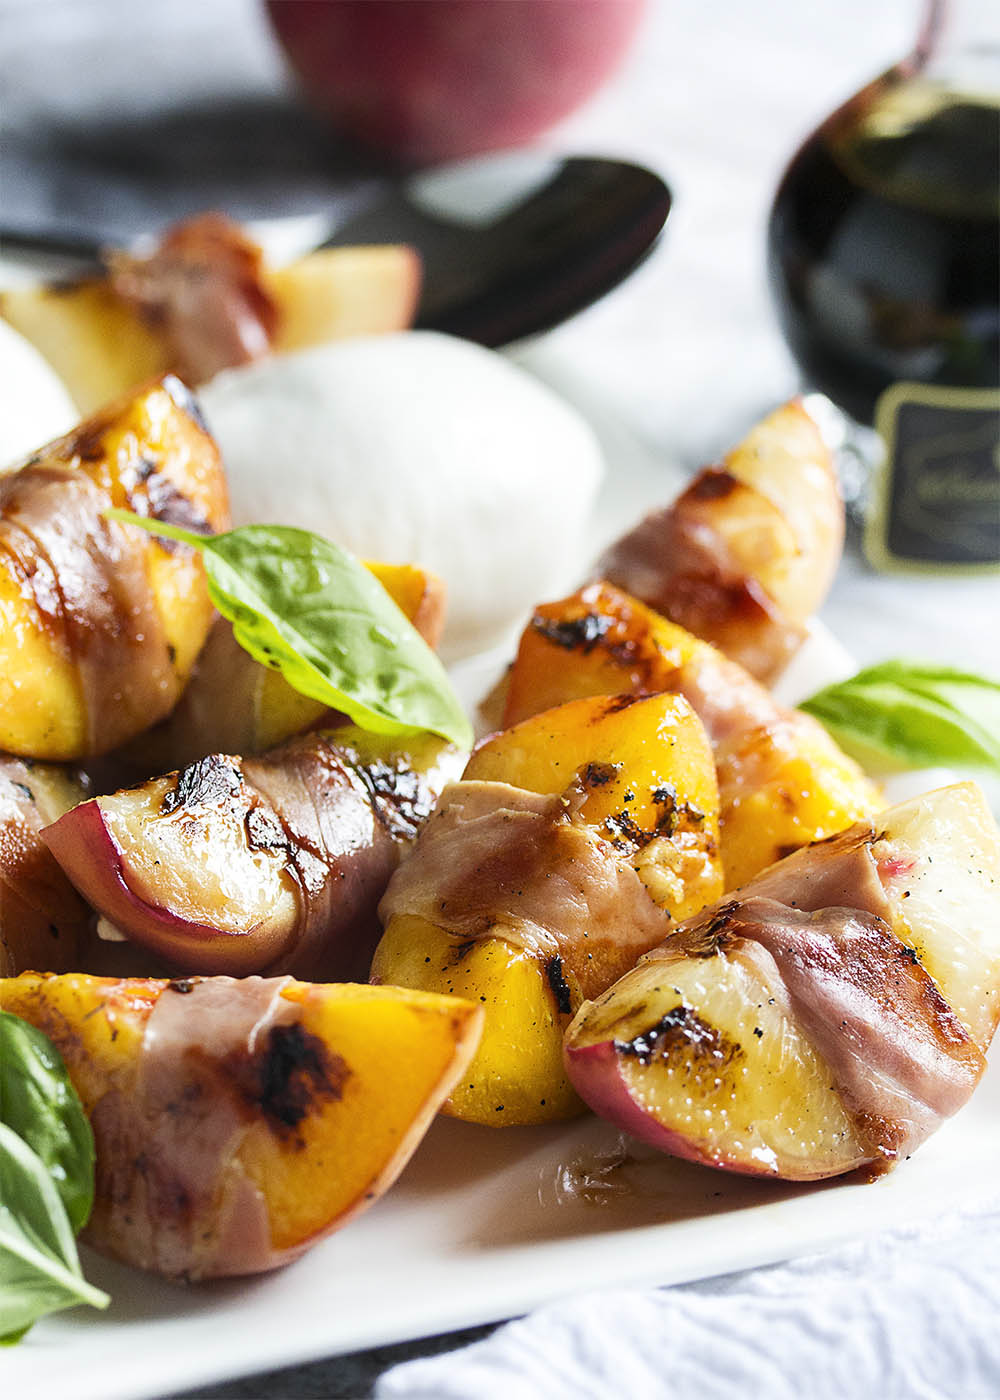 Balsamic Grilled Peaches with Burrata and Prosciutto - Sweet, salty, creamy, and tart combine in this recipe to create a recipe full of bold flavors. Juicy, sweet peaches are wrapped in prosciutto and seared on the grill, then drizzled with balsamic vinegar and paired with burrata. Wonderful as an appetizer or as a side dish. | justalittlebitofbacon.com